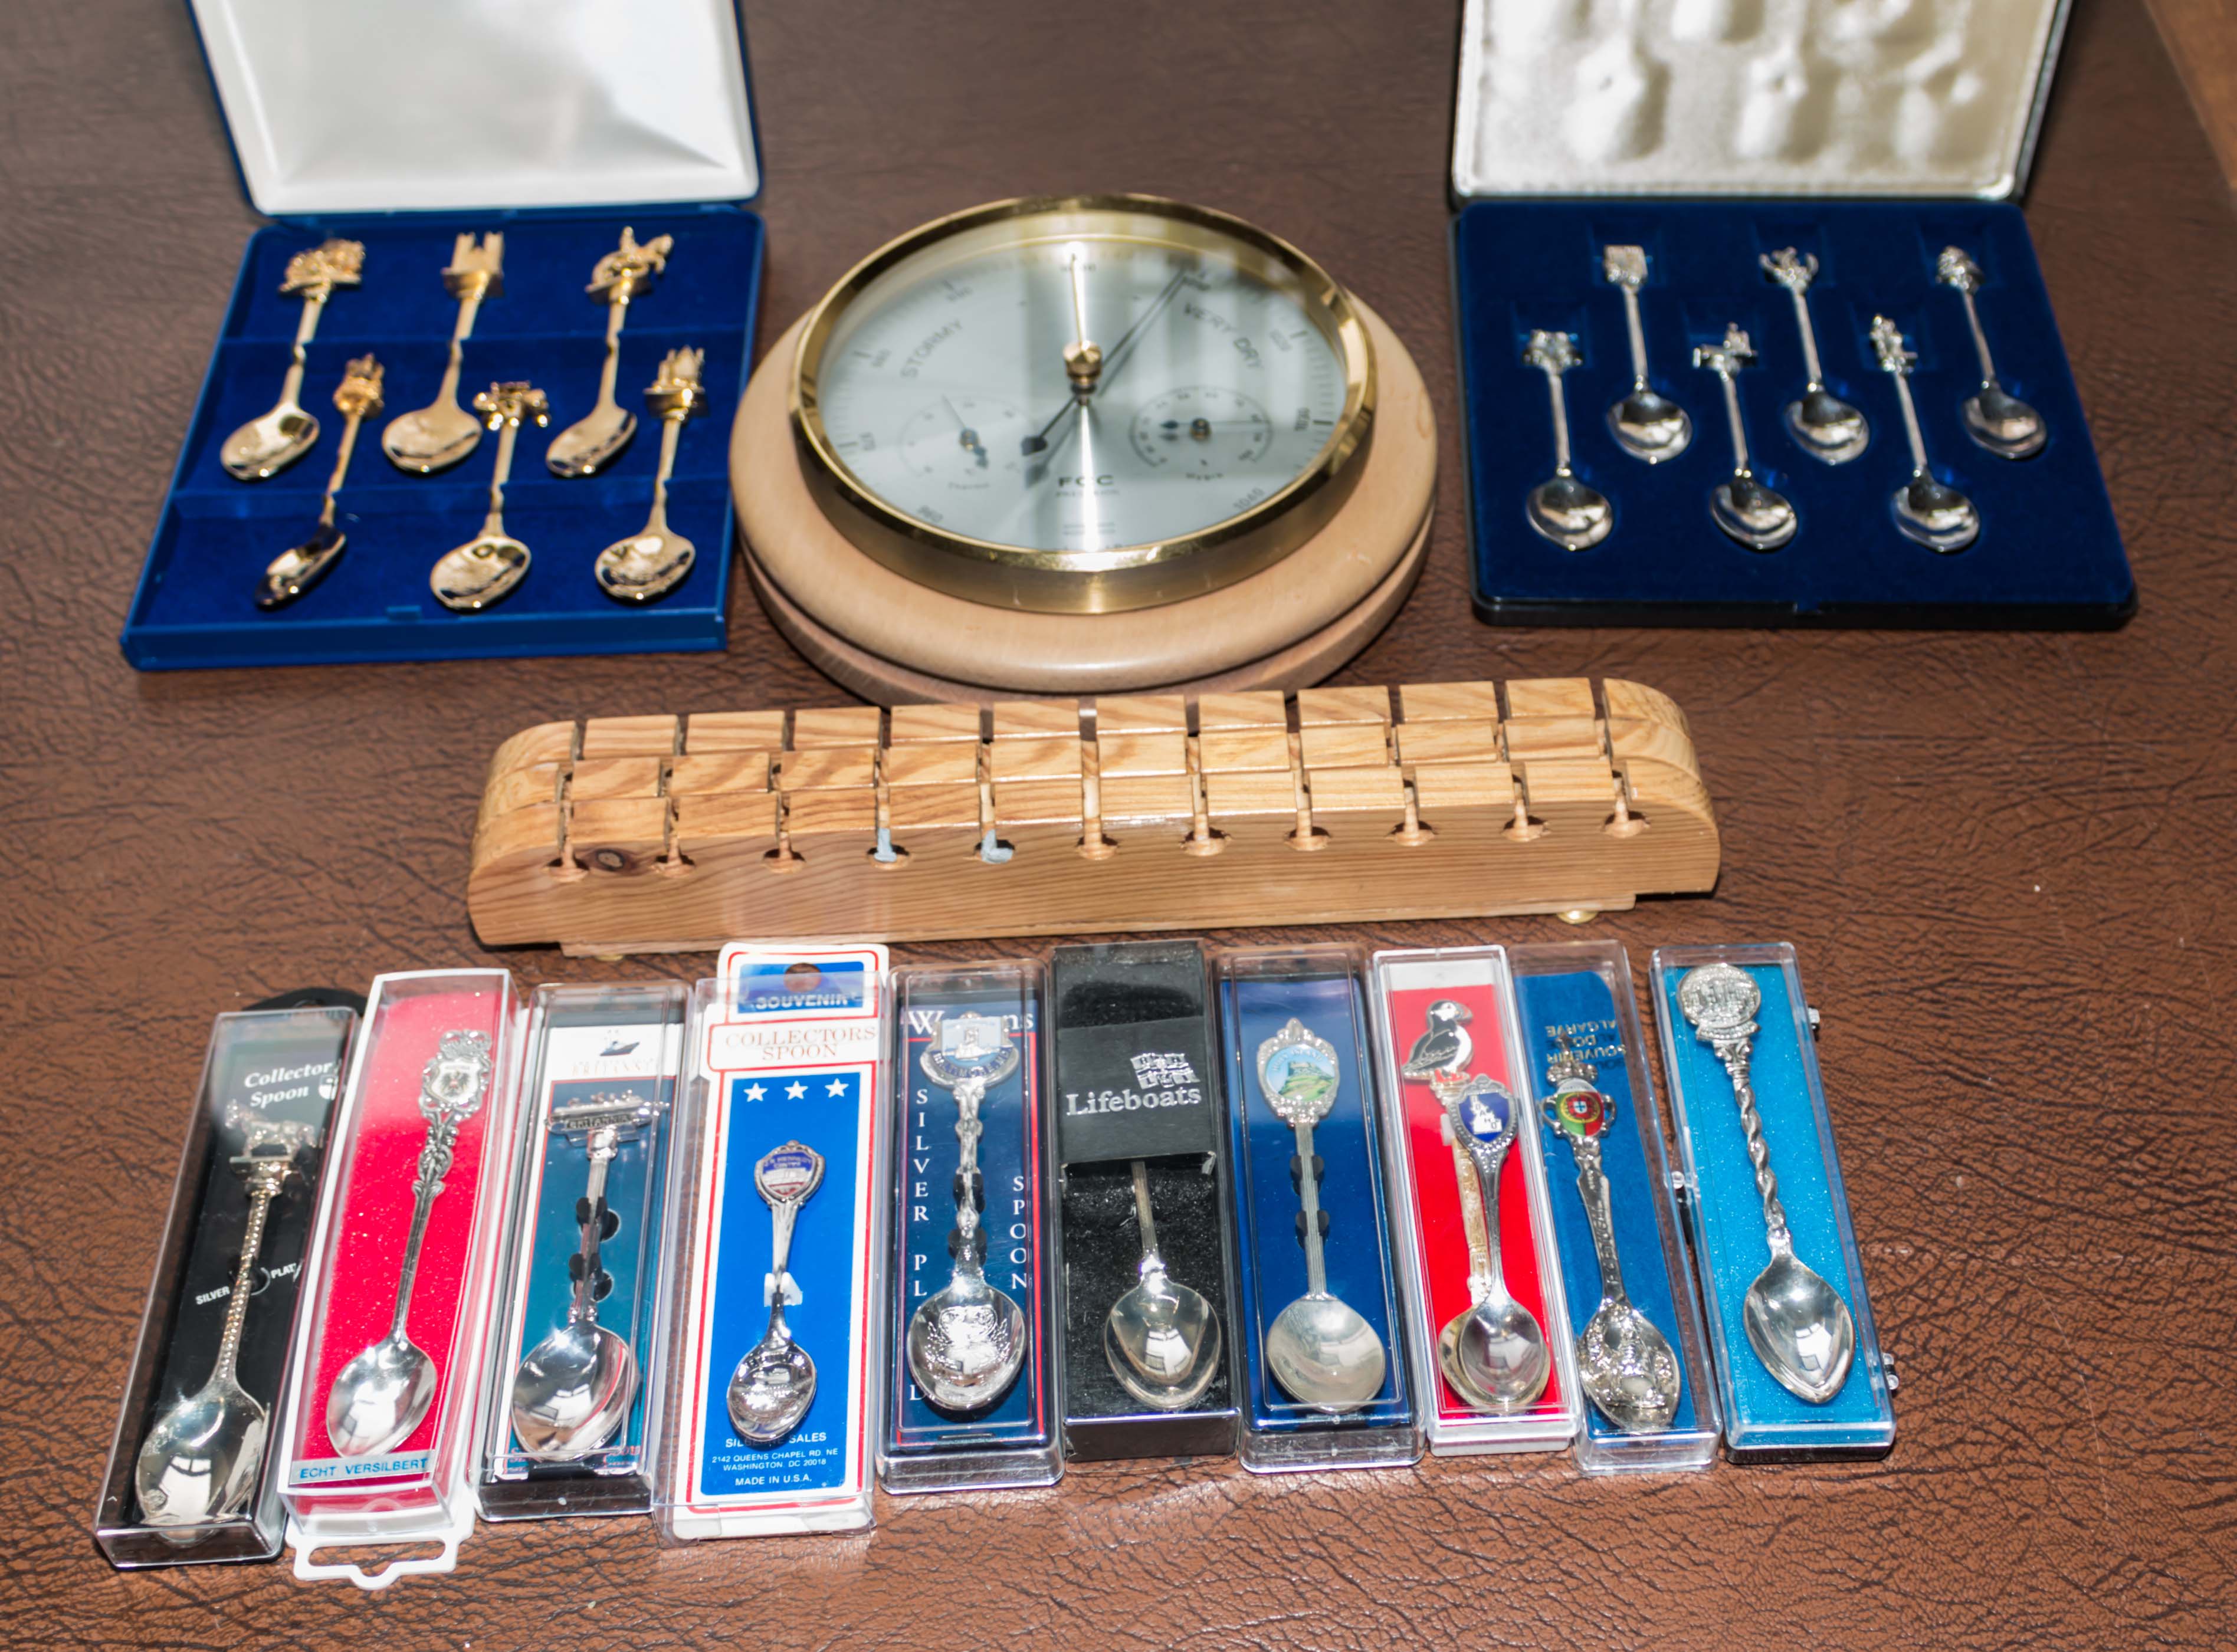 A collection of souvenir spoons and a barometer